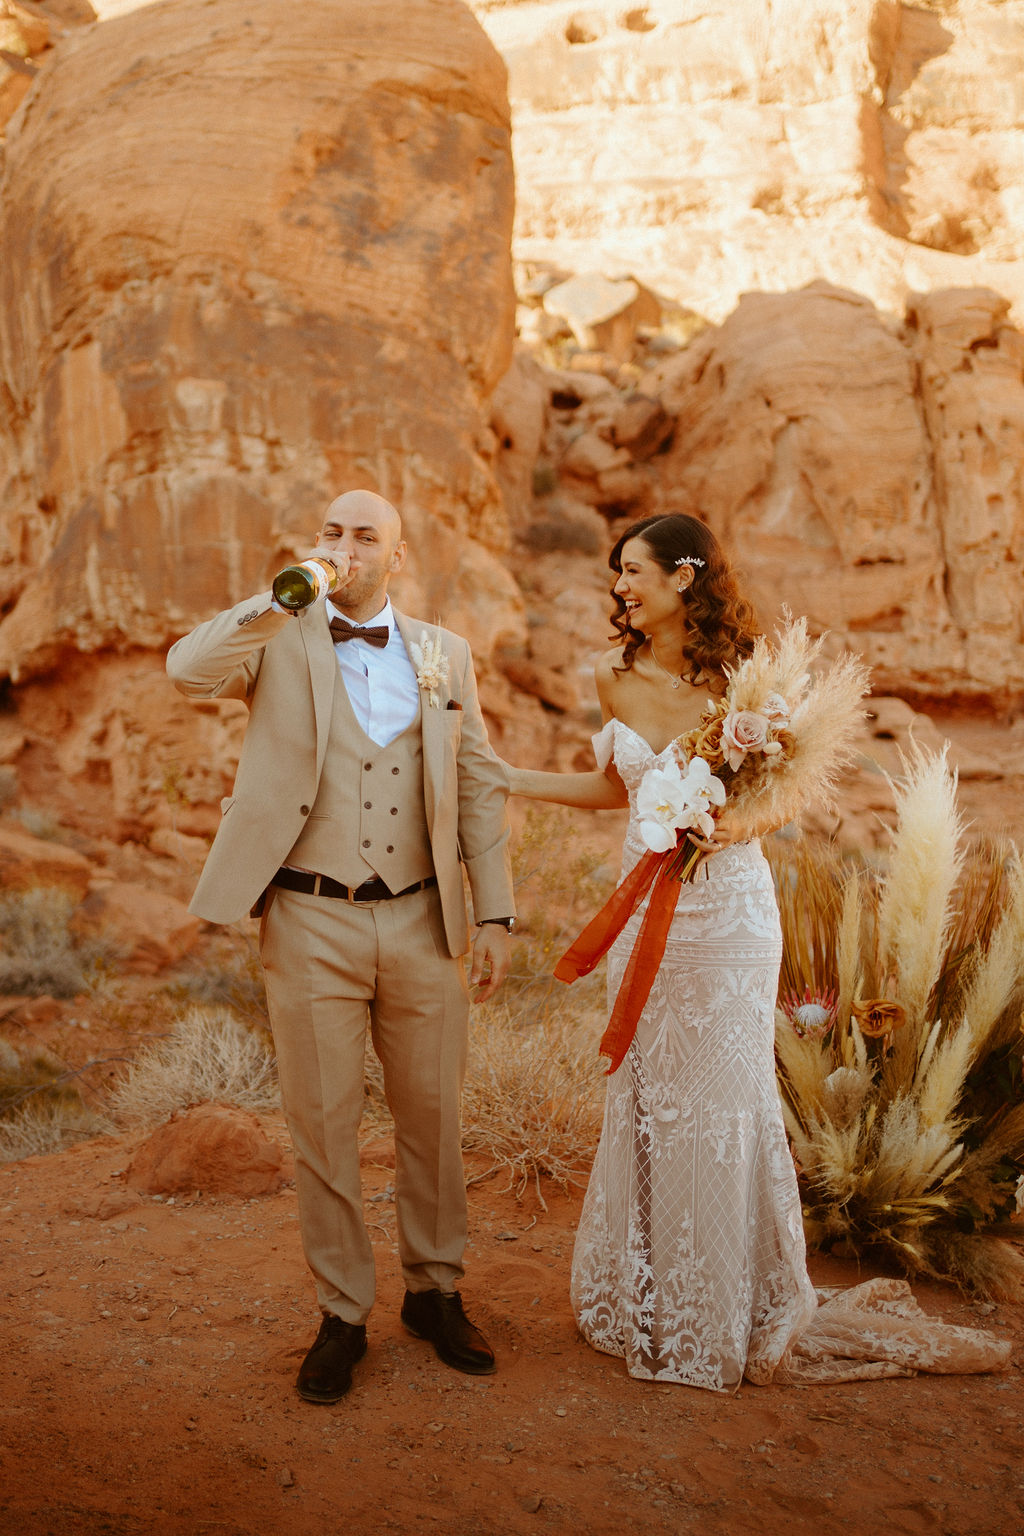 Groom celebrating with Champagne during elopement. International Couples! Welcome to the desert!